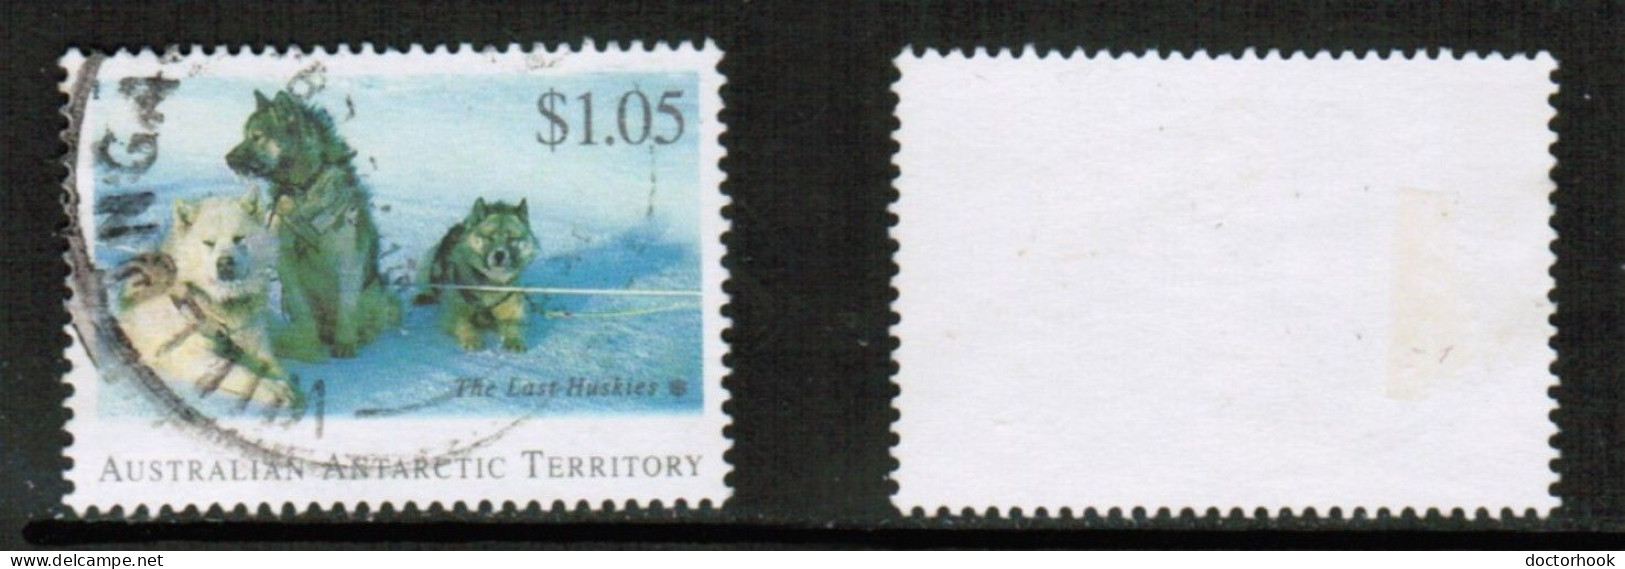 AUSTRALIAN ANTARCTIC TERRITORY   Scott # L 93 USED (CONDITION AS PER SCAN) (Stamp Scan # 929-3) - Used Stamps